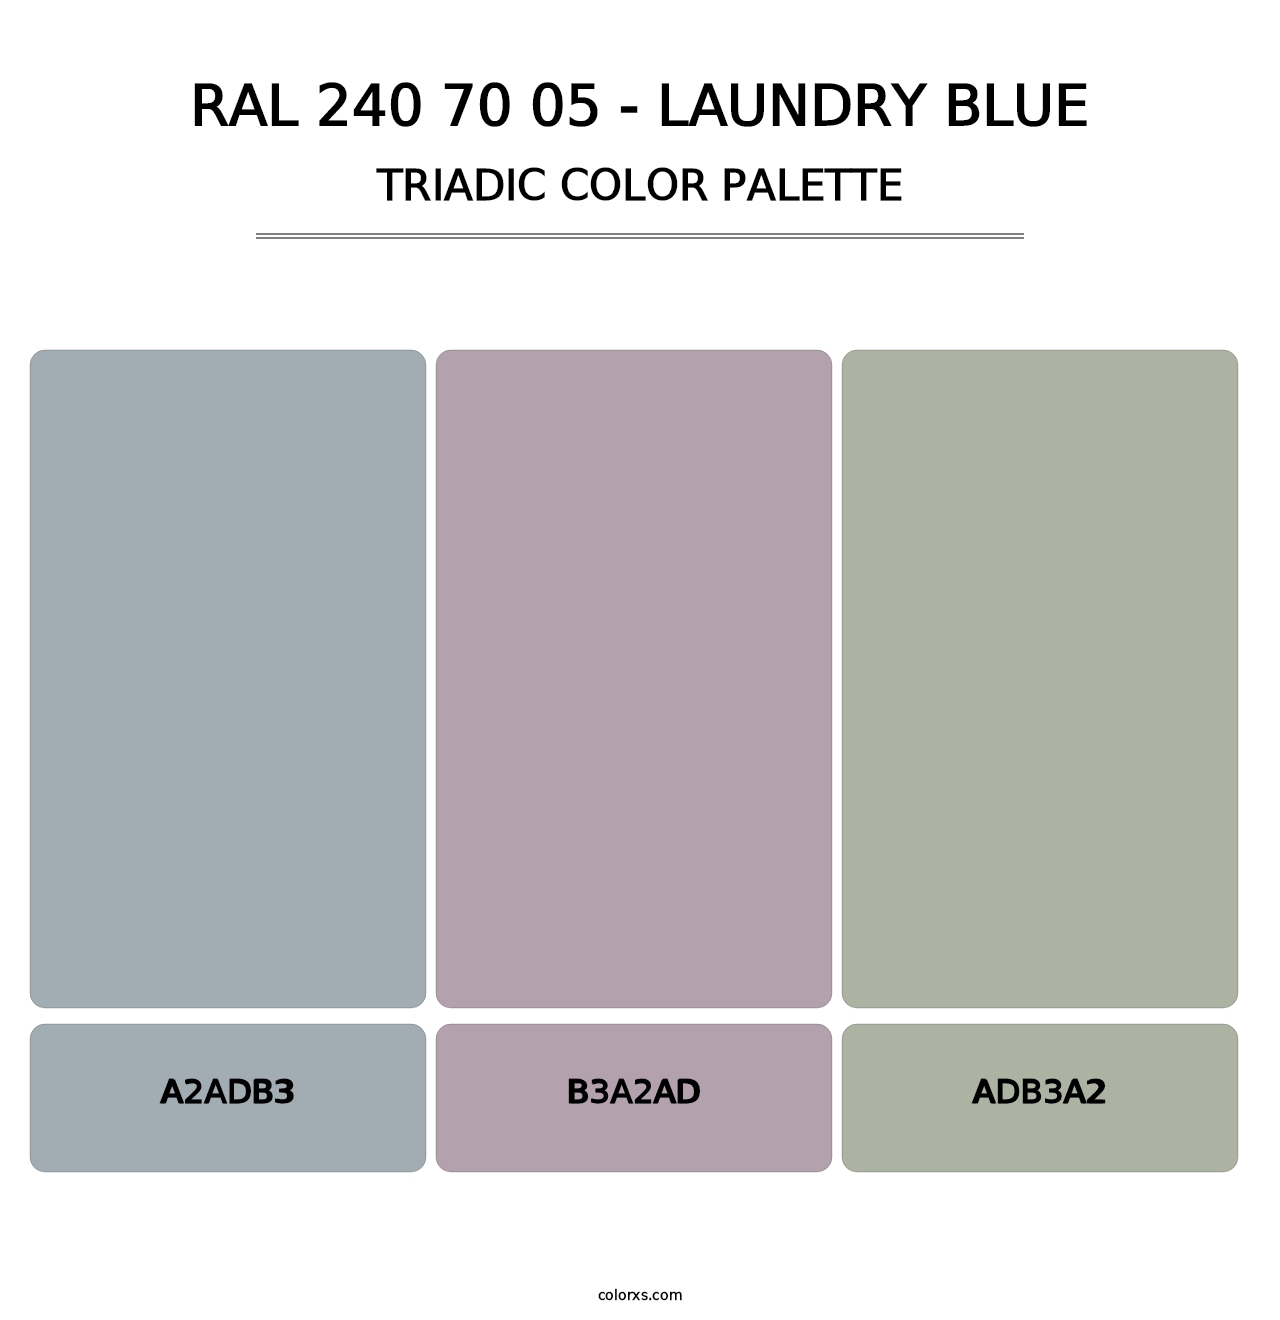 RAL 240 70 05 - Laundry Blue - Triadic Color Palette